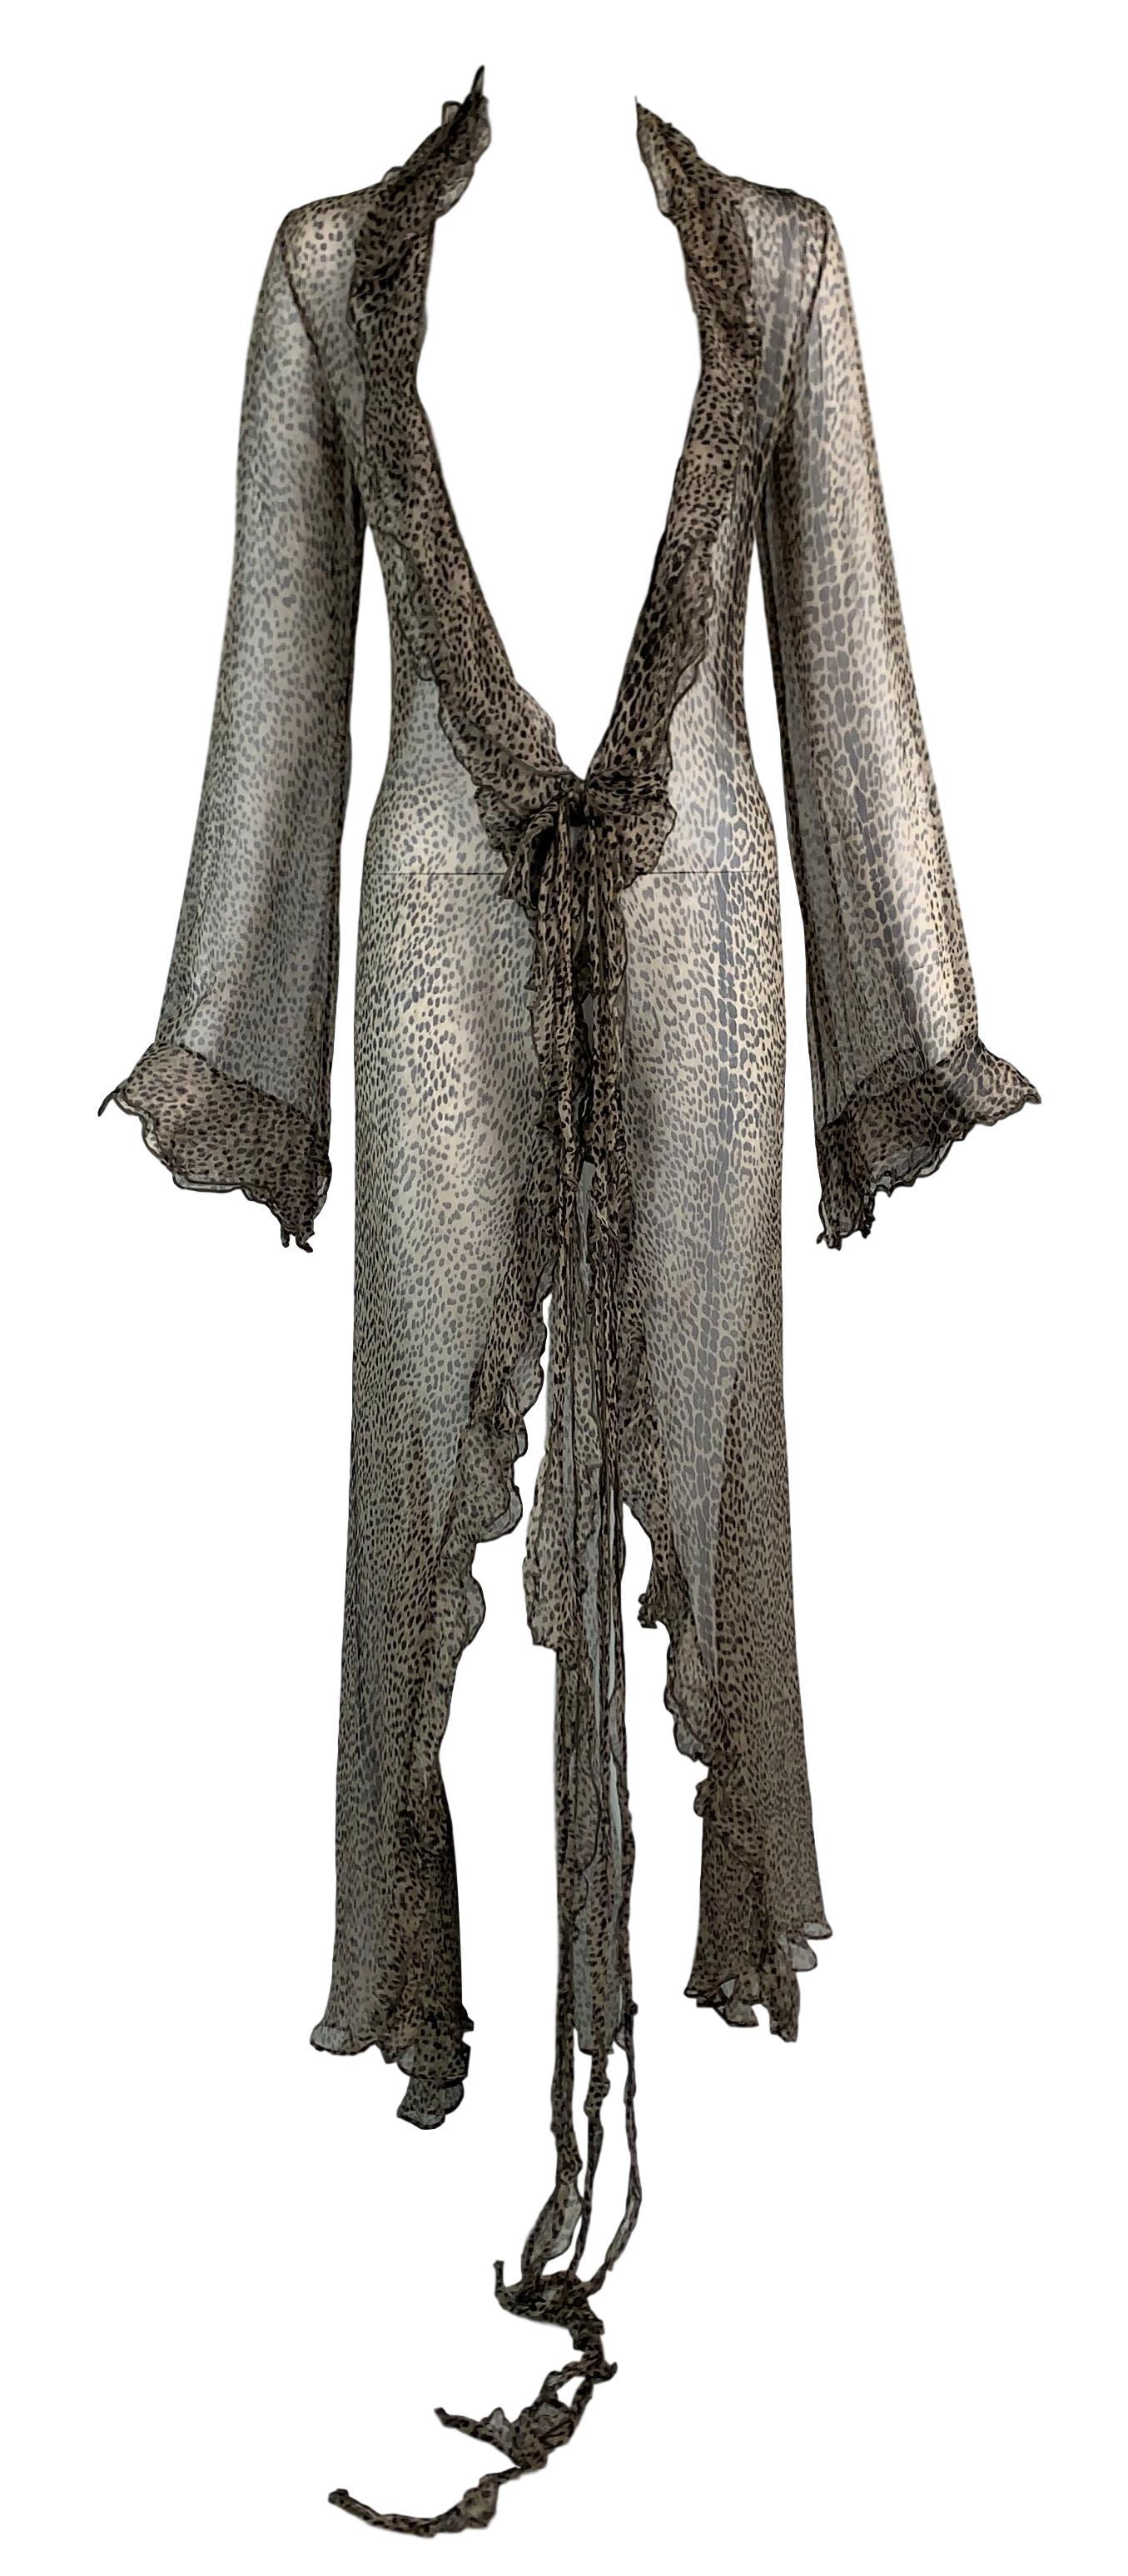 DESIGNER: S/S 2002 Roberto Cavalli Runway- was shown on the runway in a different animal print

Please contact for more information and/or photos.

CONDITION: Good- no flaws

MATERIAL: Silk

COUNTRY MADE: Italy

SIZE: 44

MEASUREMENTS; provided as a